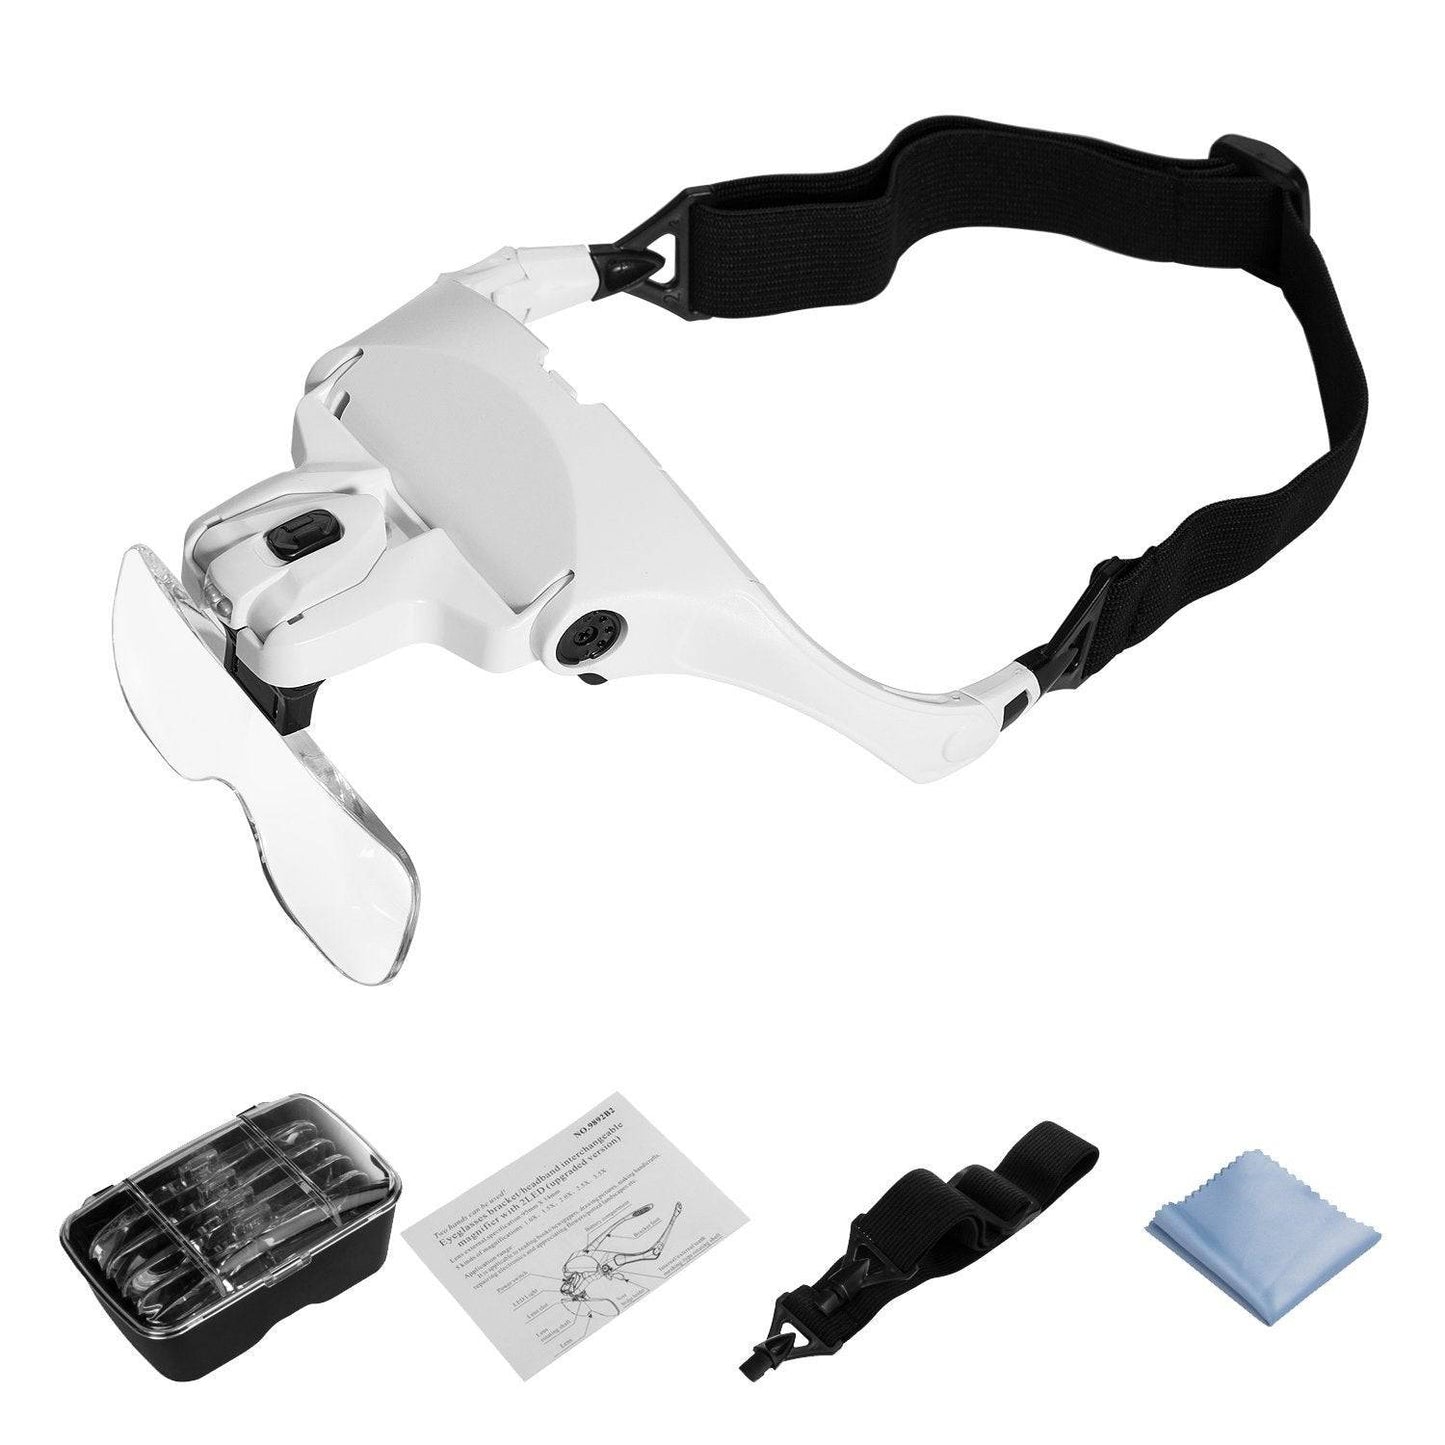 Headband Magnifier with LED Light, Head Mount Magnifier Glasses Light - VIP Extensions